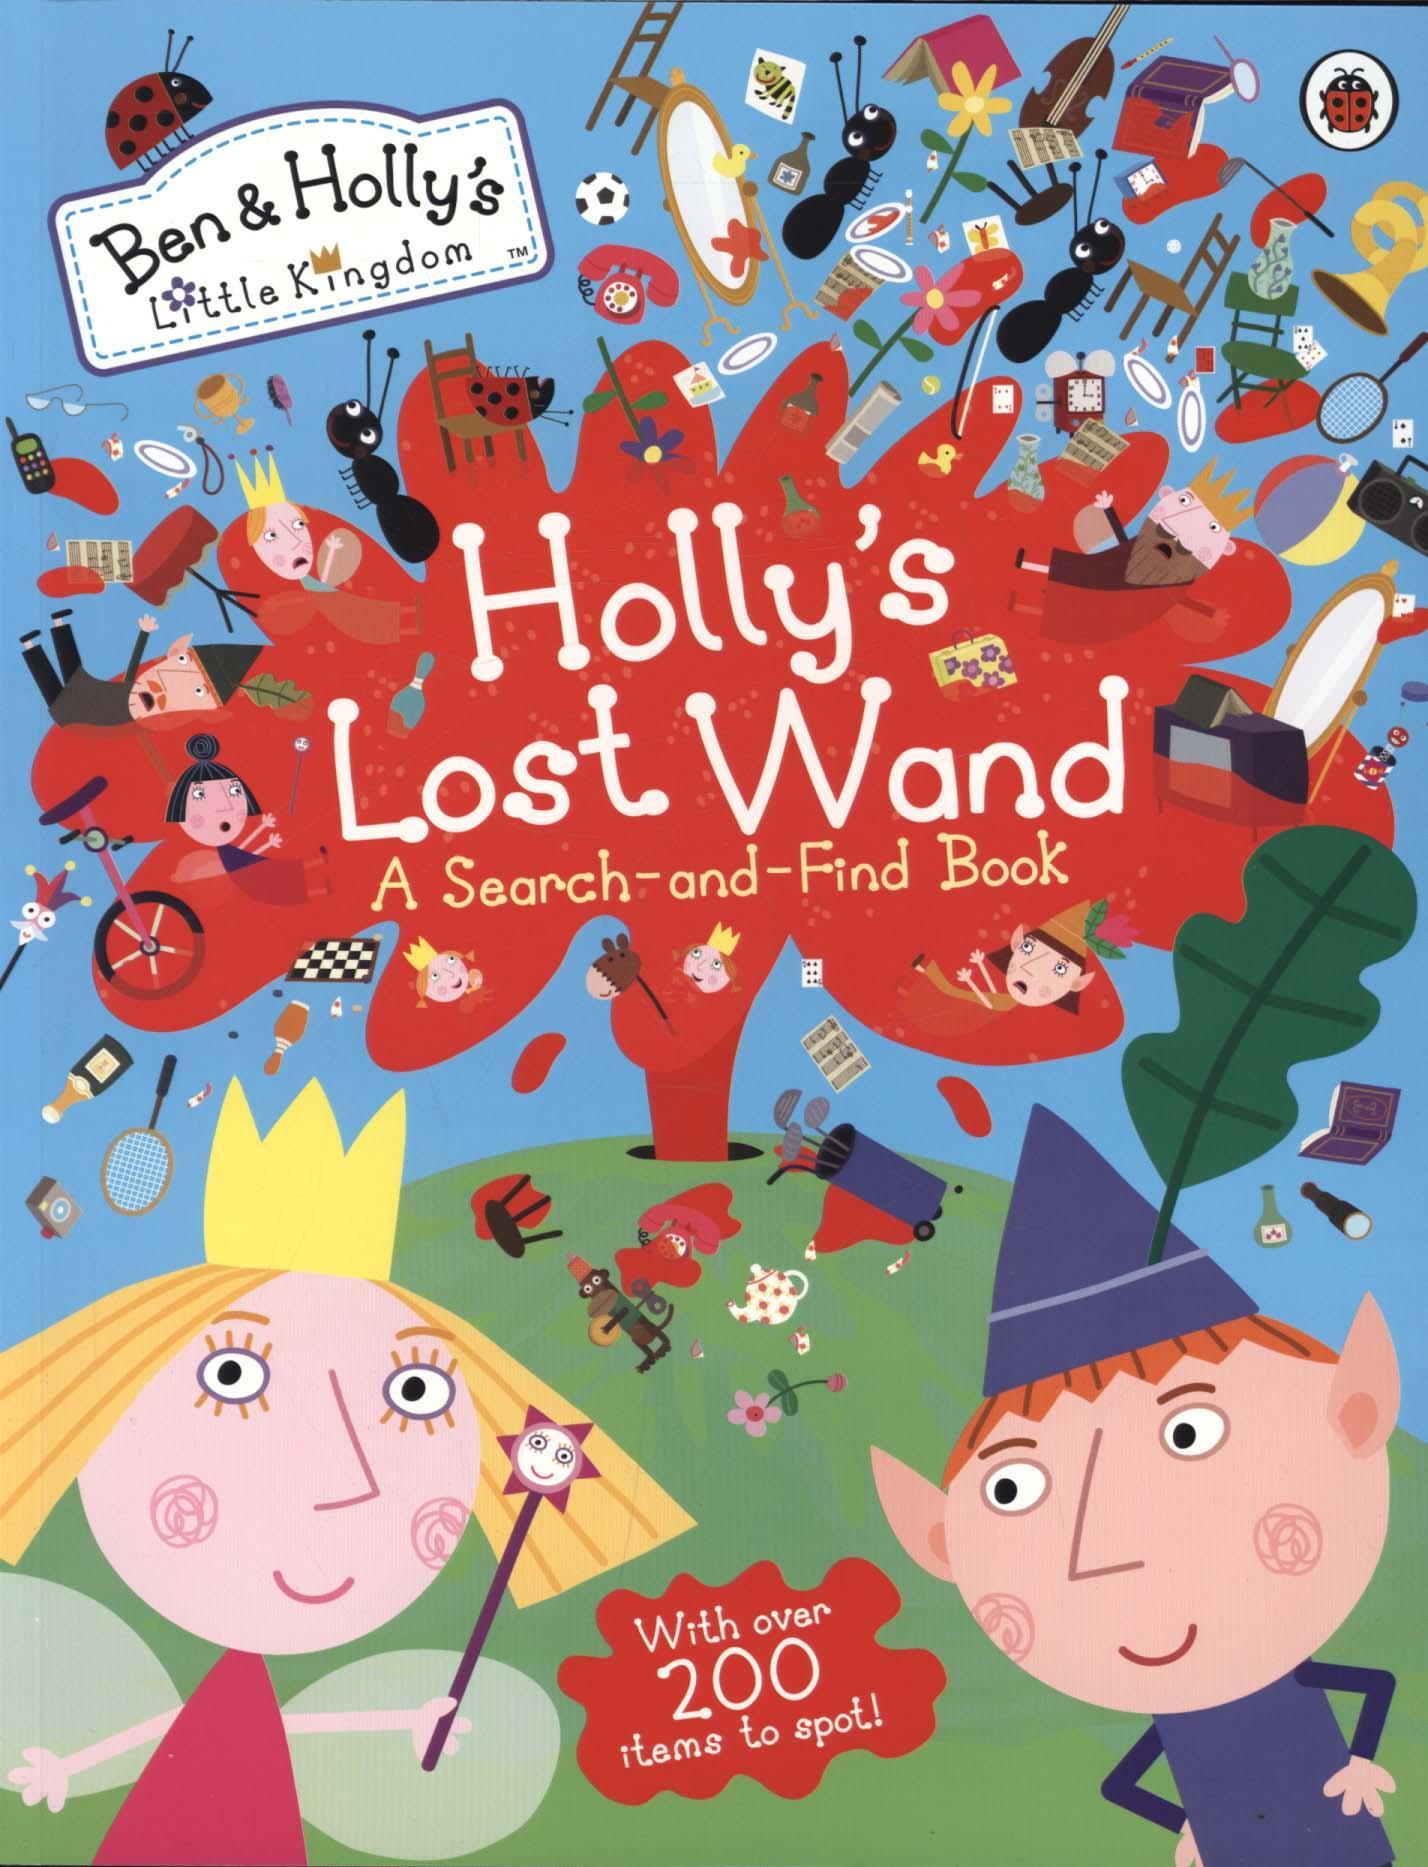 Ben and Holly's Little Kingdom: Holly's Lost Wand - A Search -  